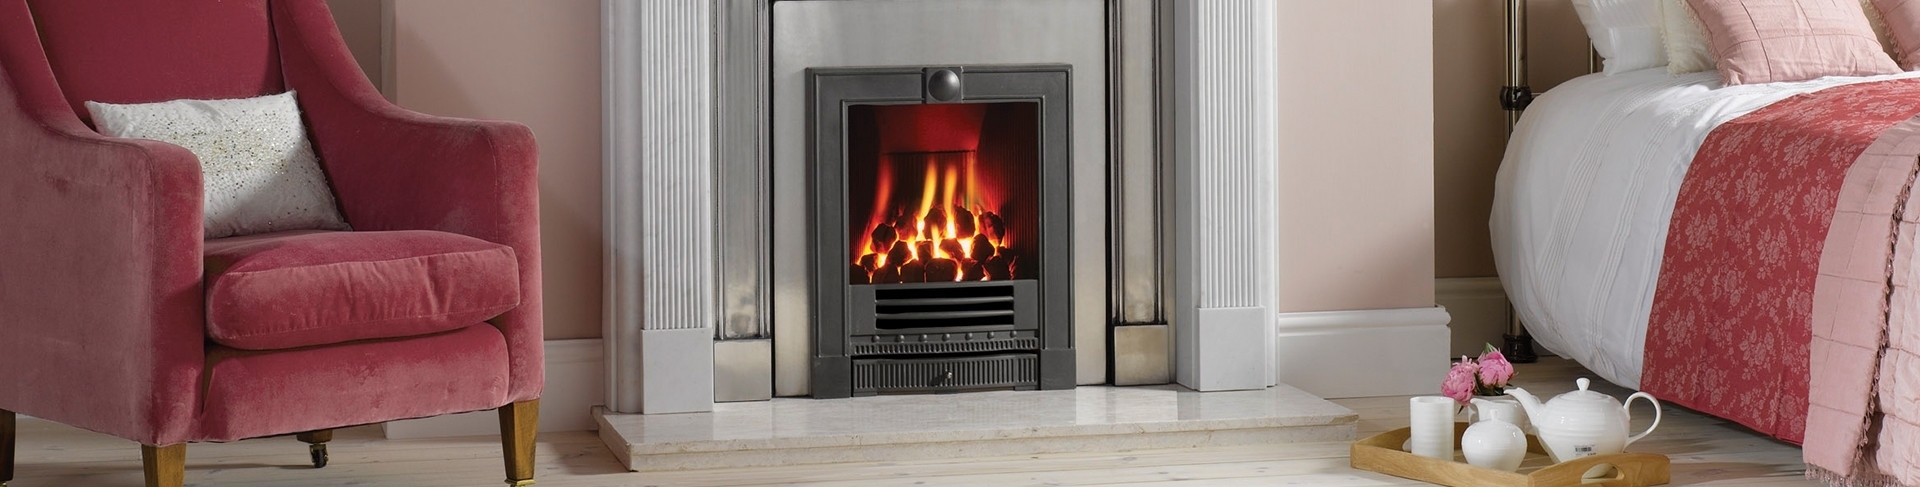 Gas Fireplace Glass Doors Open or Closed Lovely the London Fireplaces